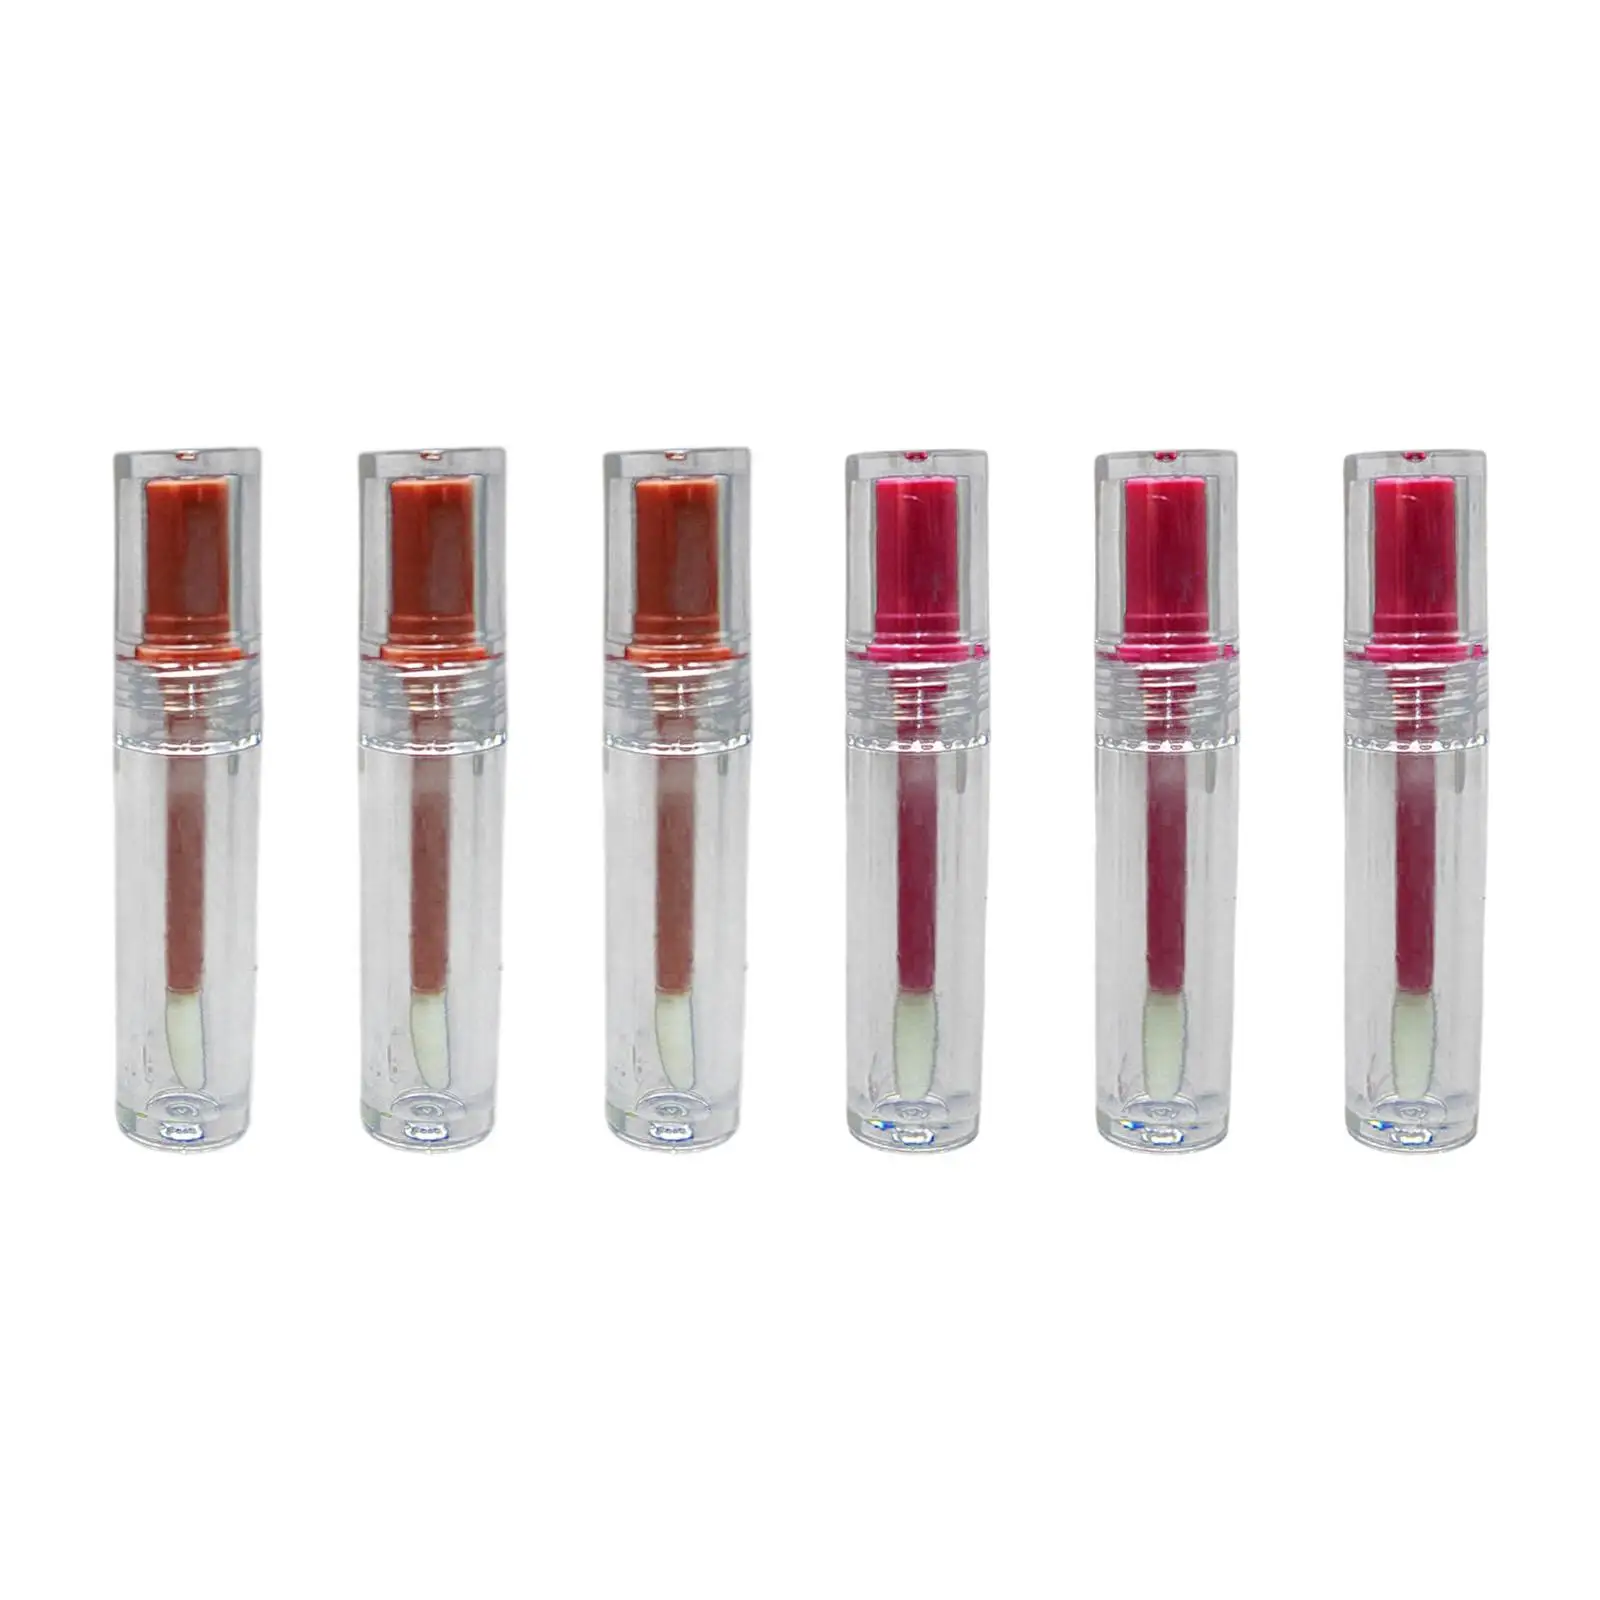 

3Pcs Lip Gloss Tubes Mini 3ml Refillable with Rubber Insert Empty Lipgloss Containers for Lip Samples DIY Makeup Travel